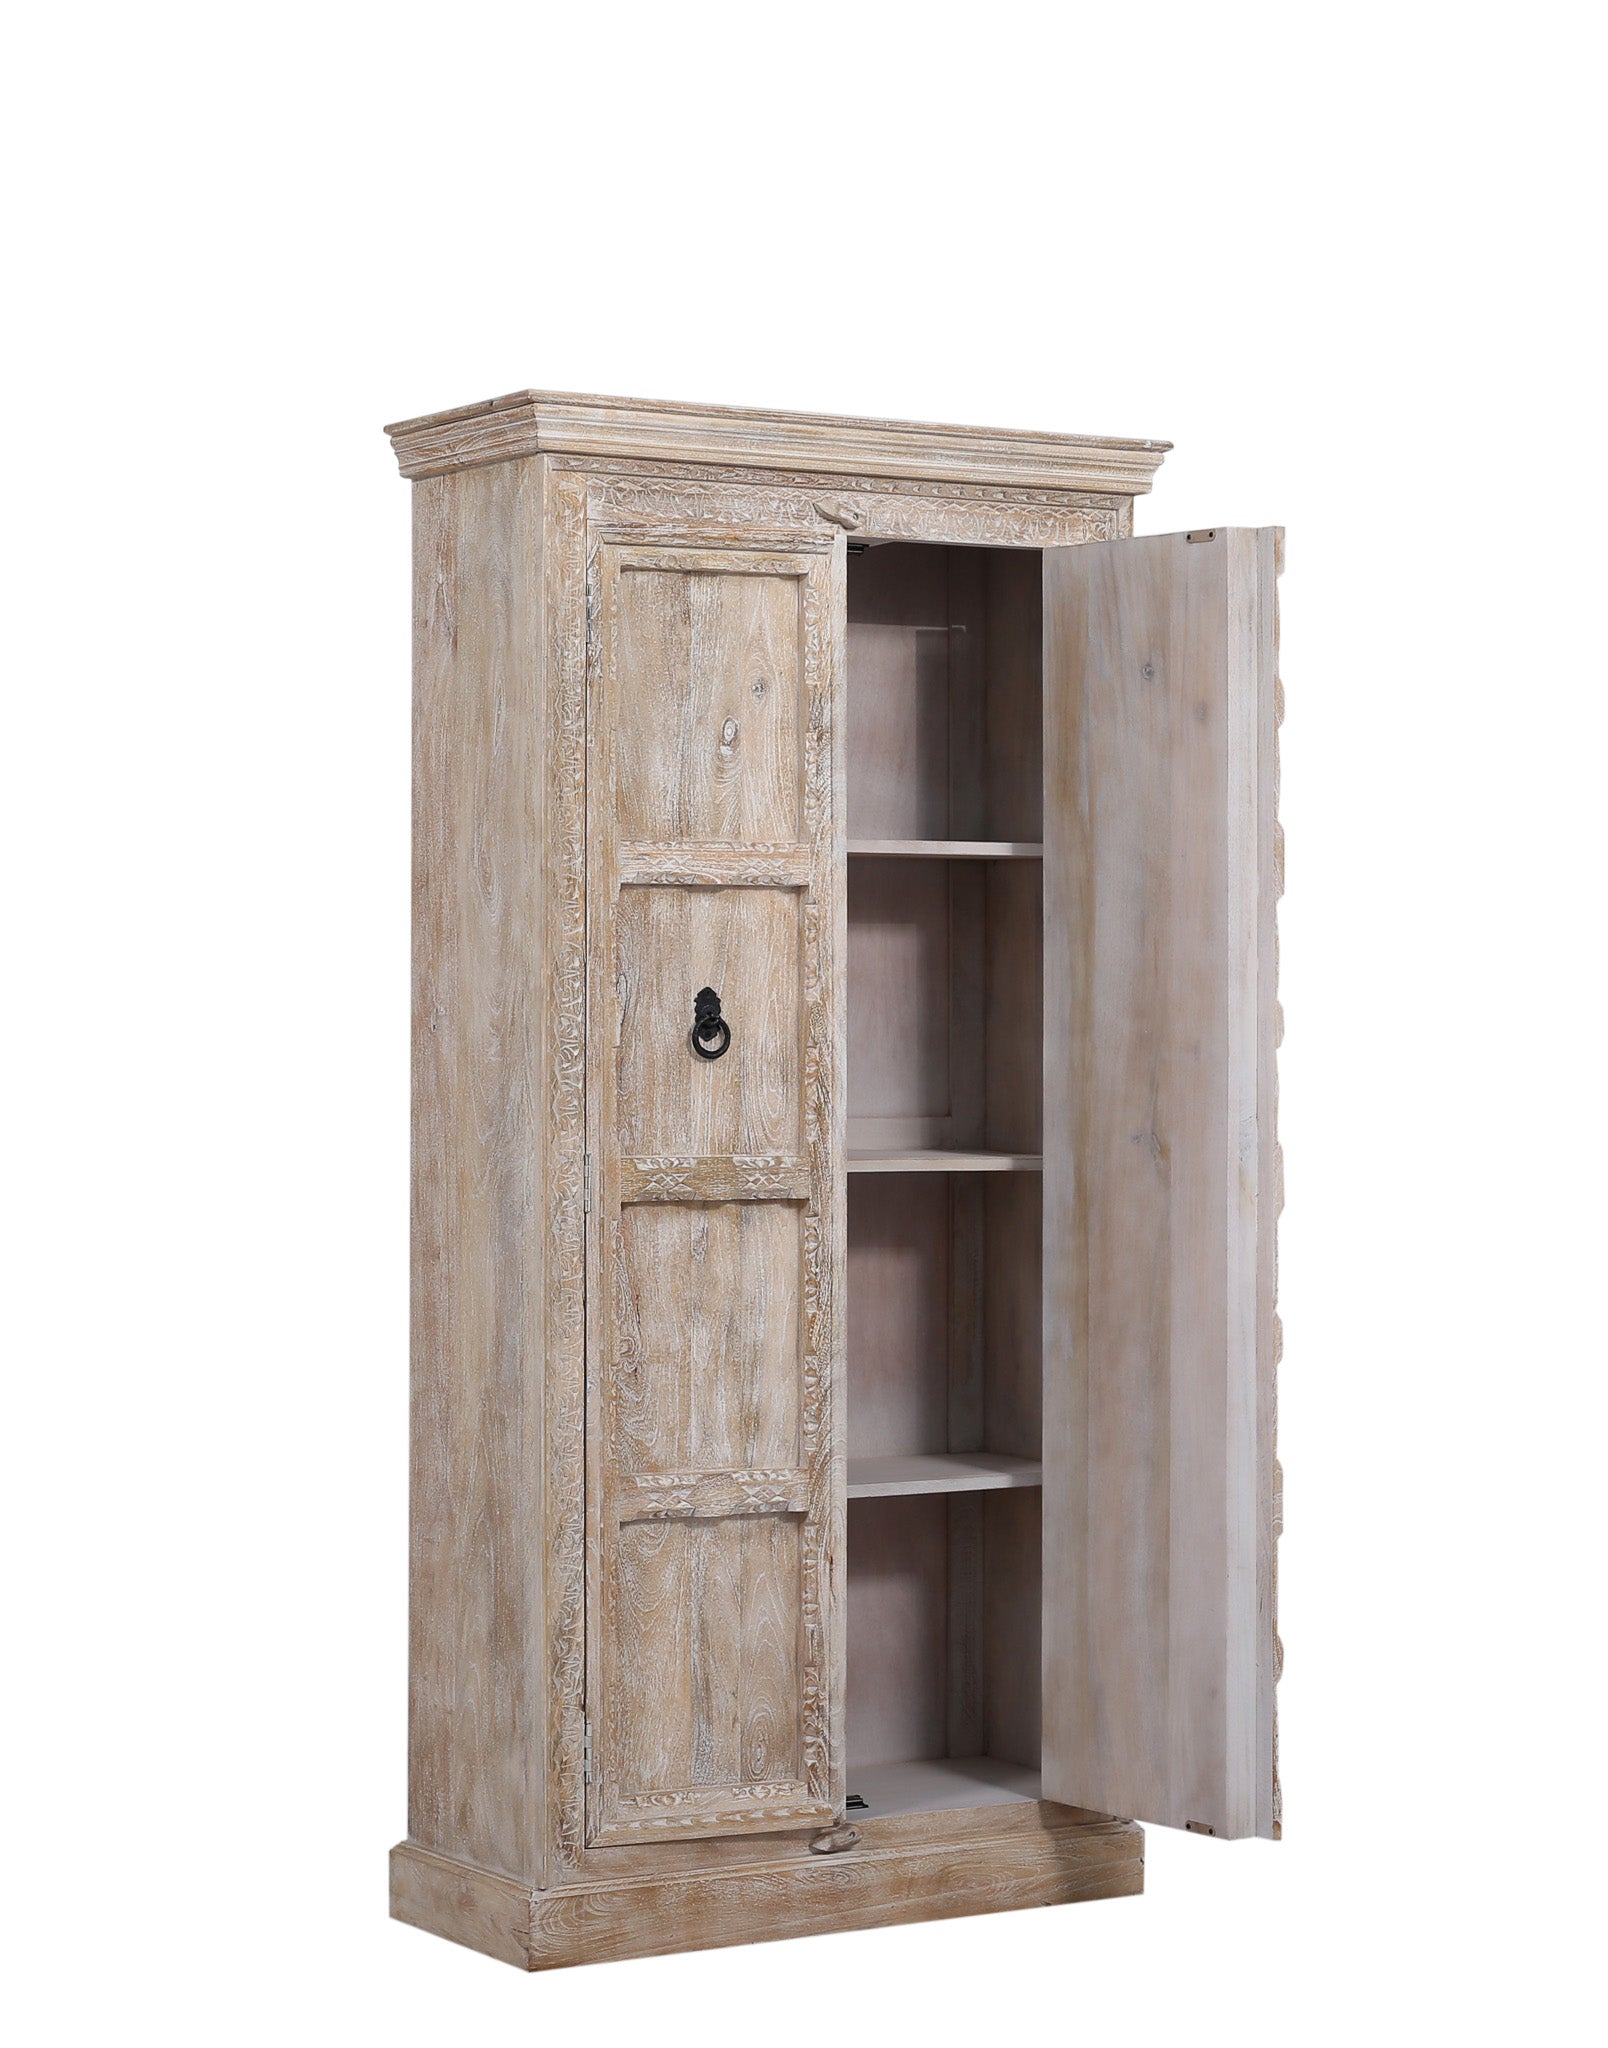 Mahala Nomad Wooden Cabinet in Distressed Natural Finish in Cabinets by VMInnovations